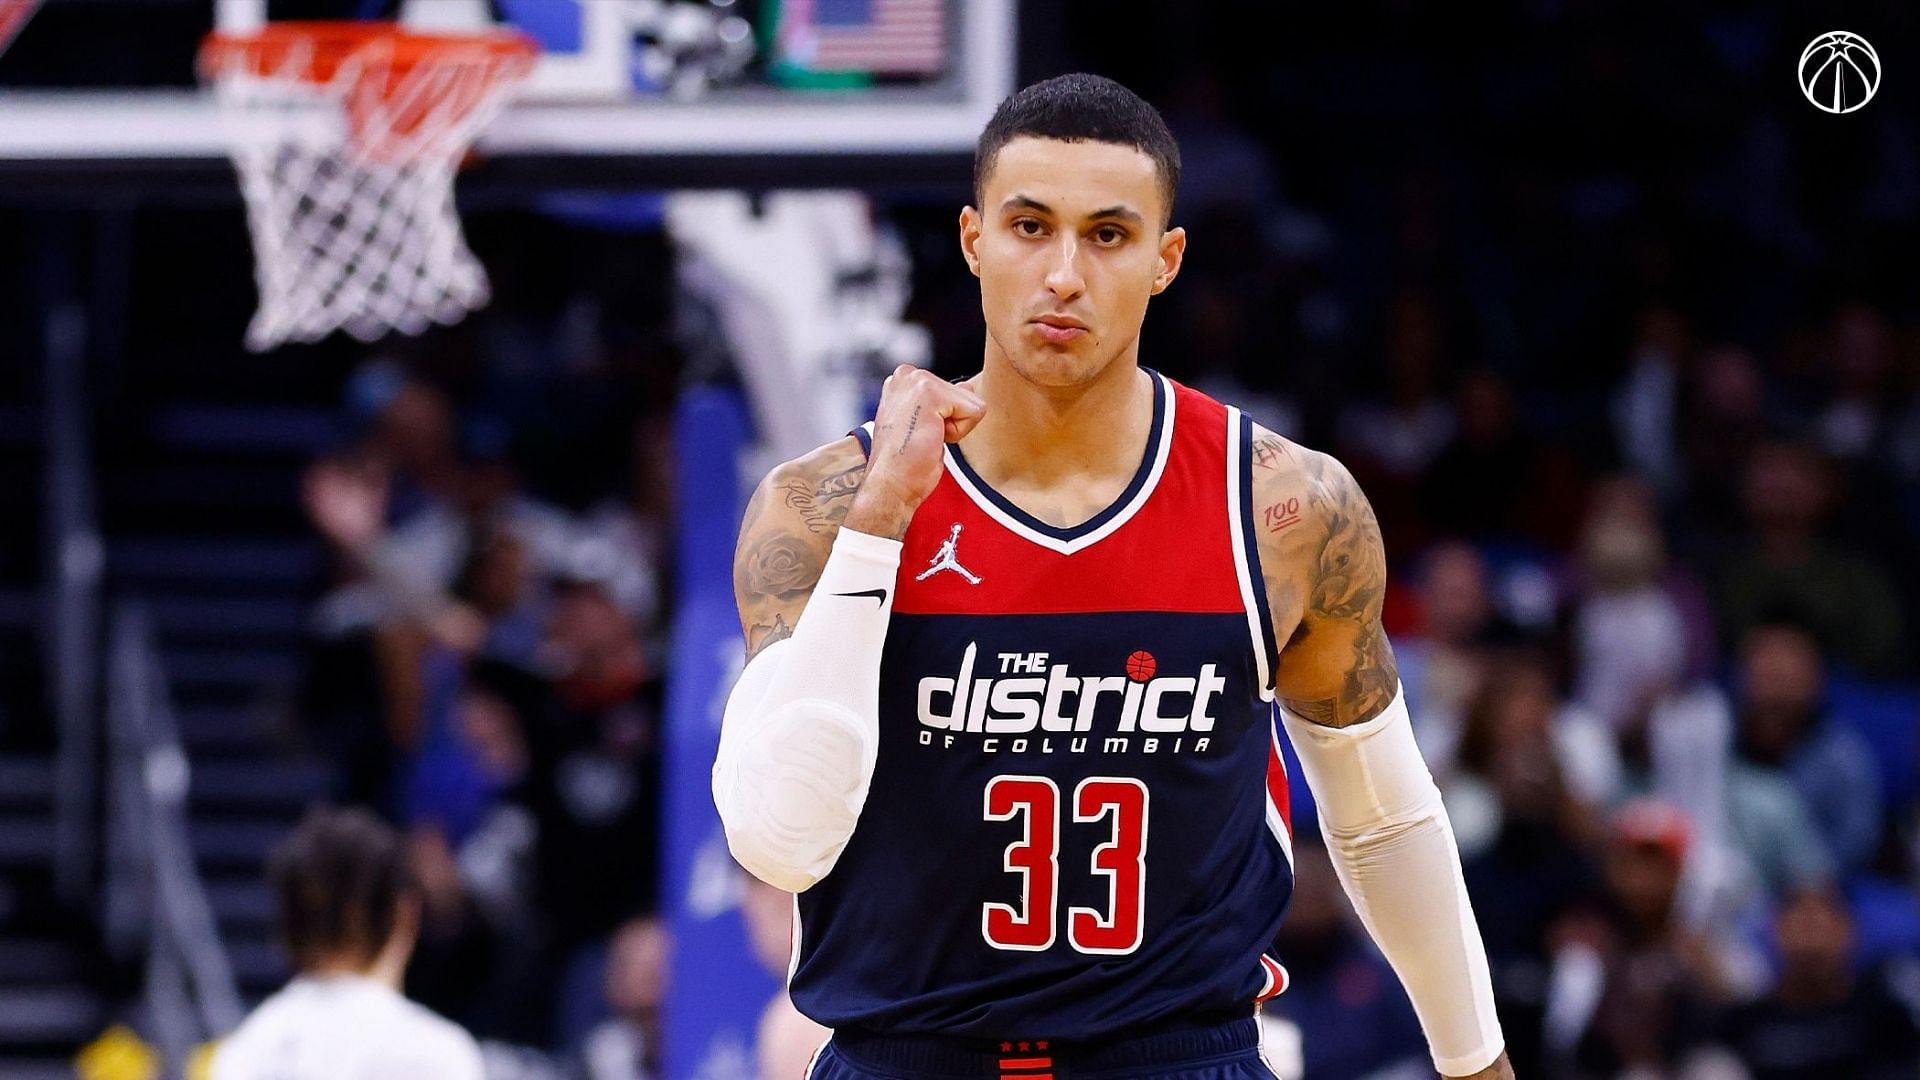 Kyle Kuzma asserts that the Showtime Lakers would dominate the NBA today. [Photo: NBA.com]